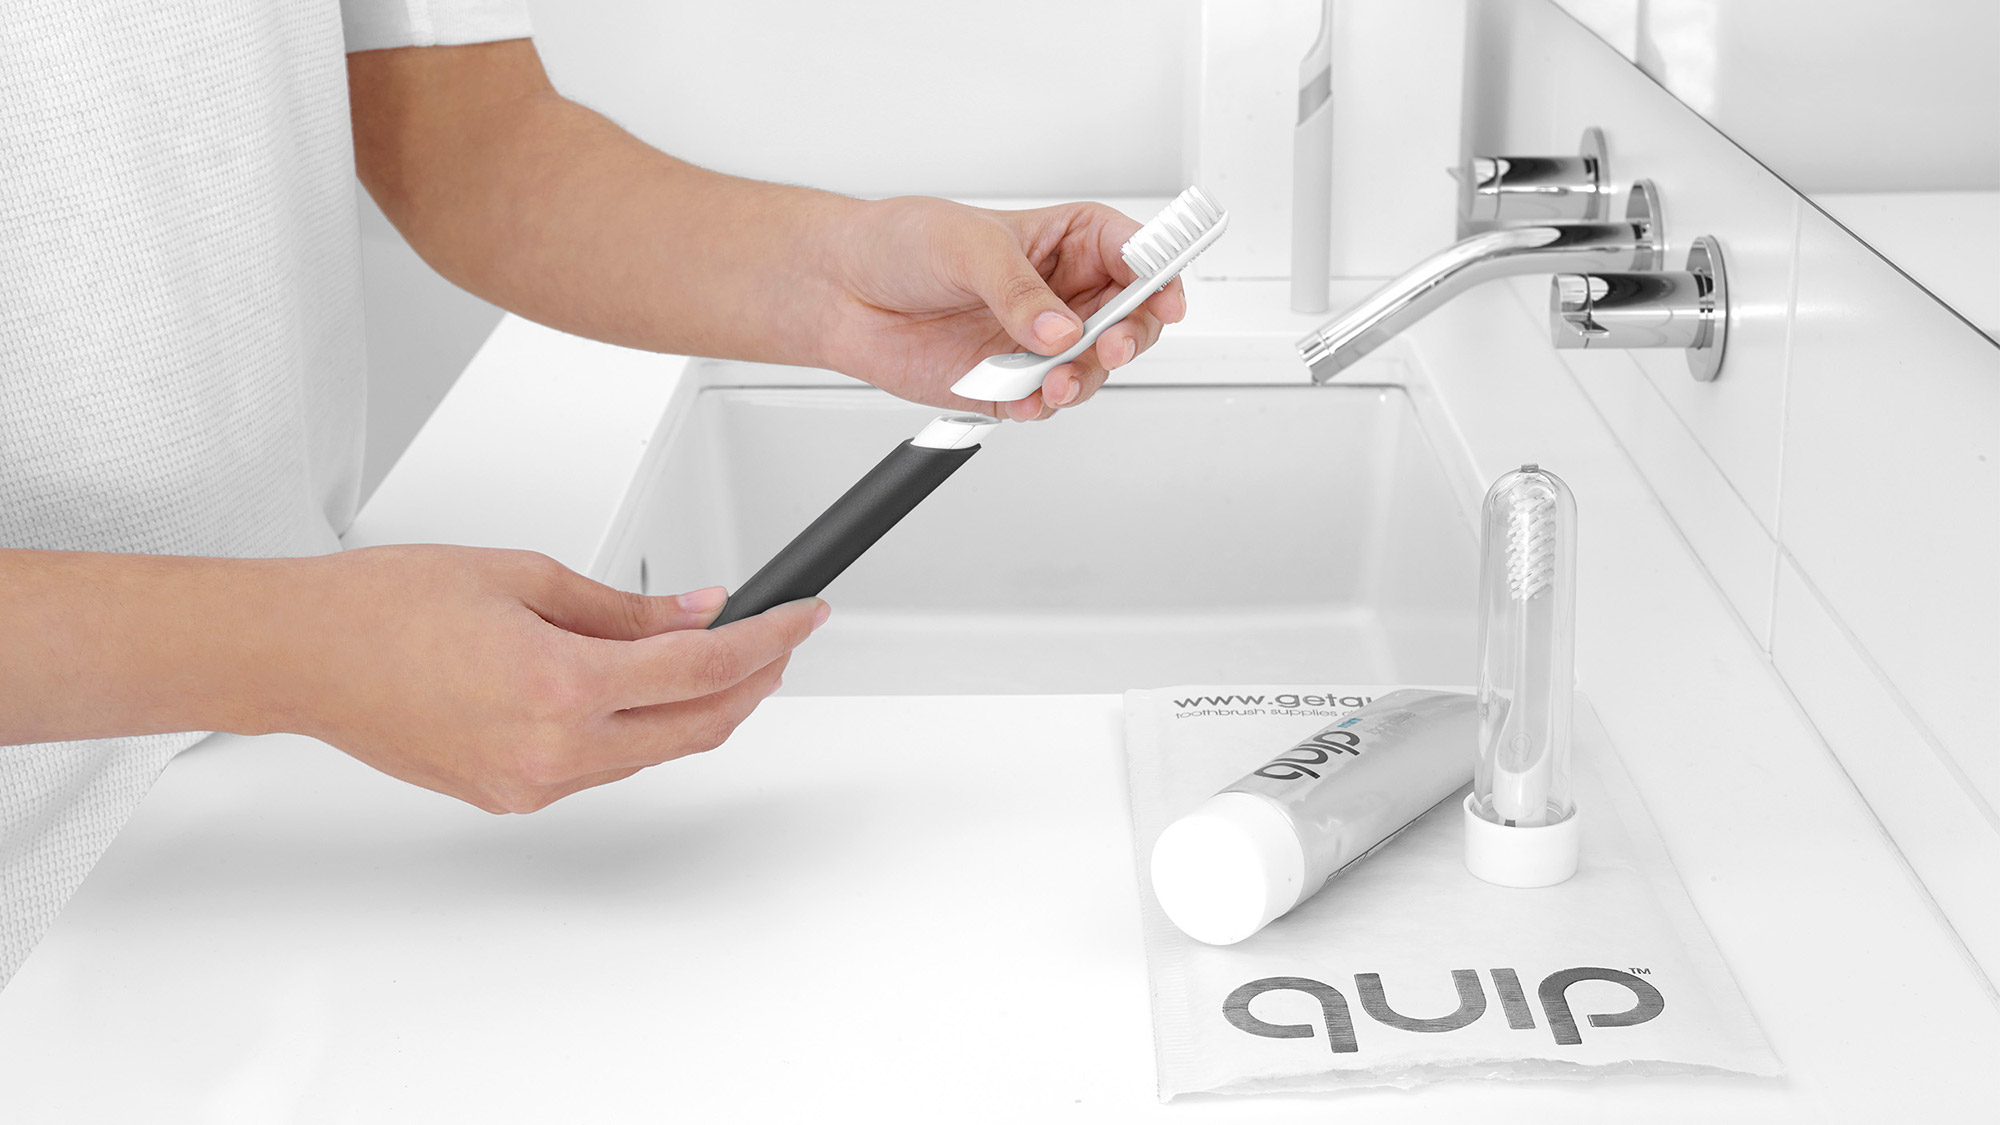 The Quip Toothbrush: A Product of Design and Dentistry